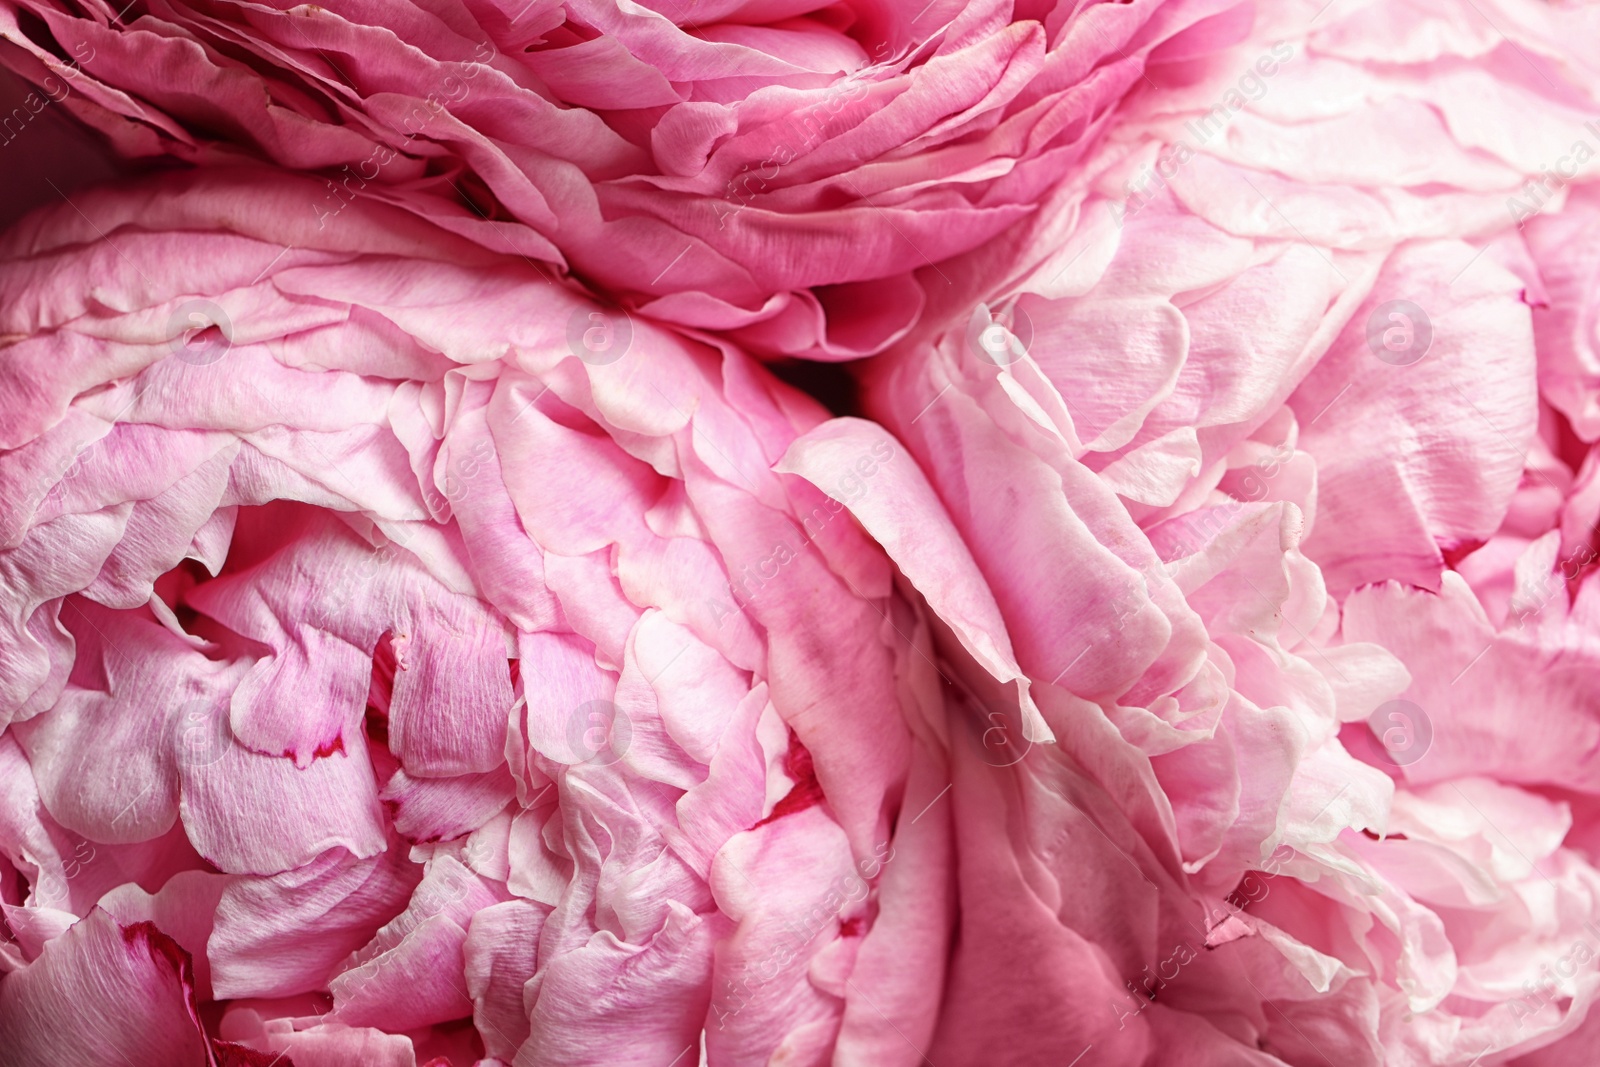 Photo of Beautiful fresh peonies as background, closeup view. Floral decor